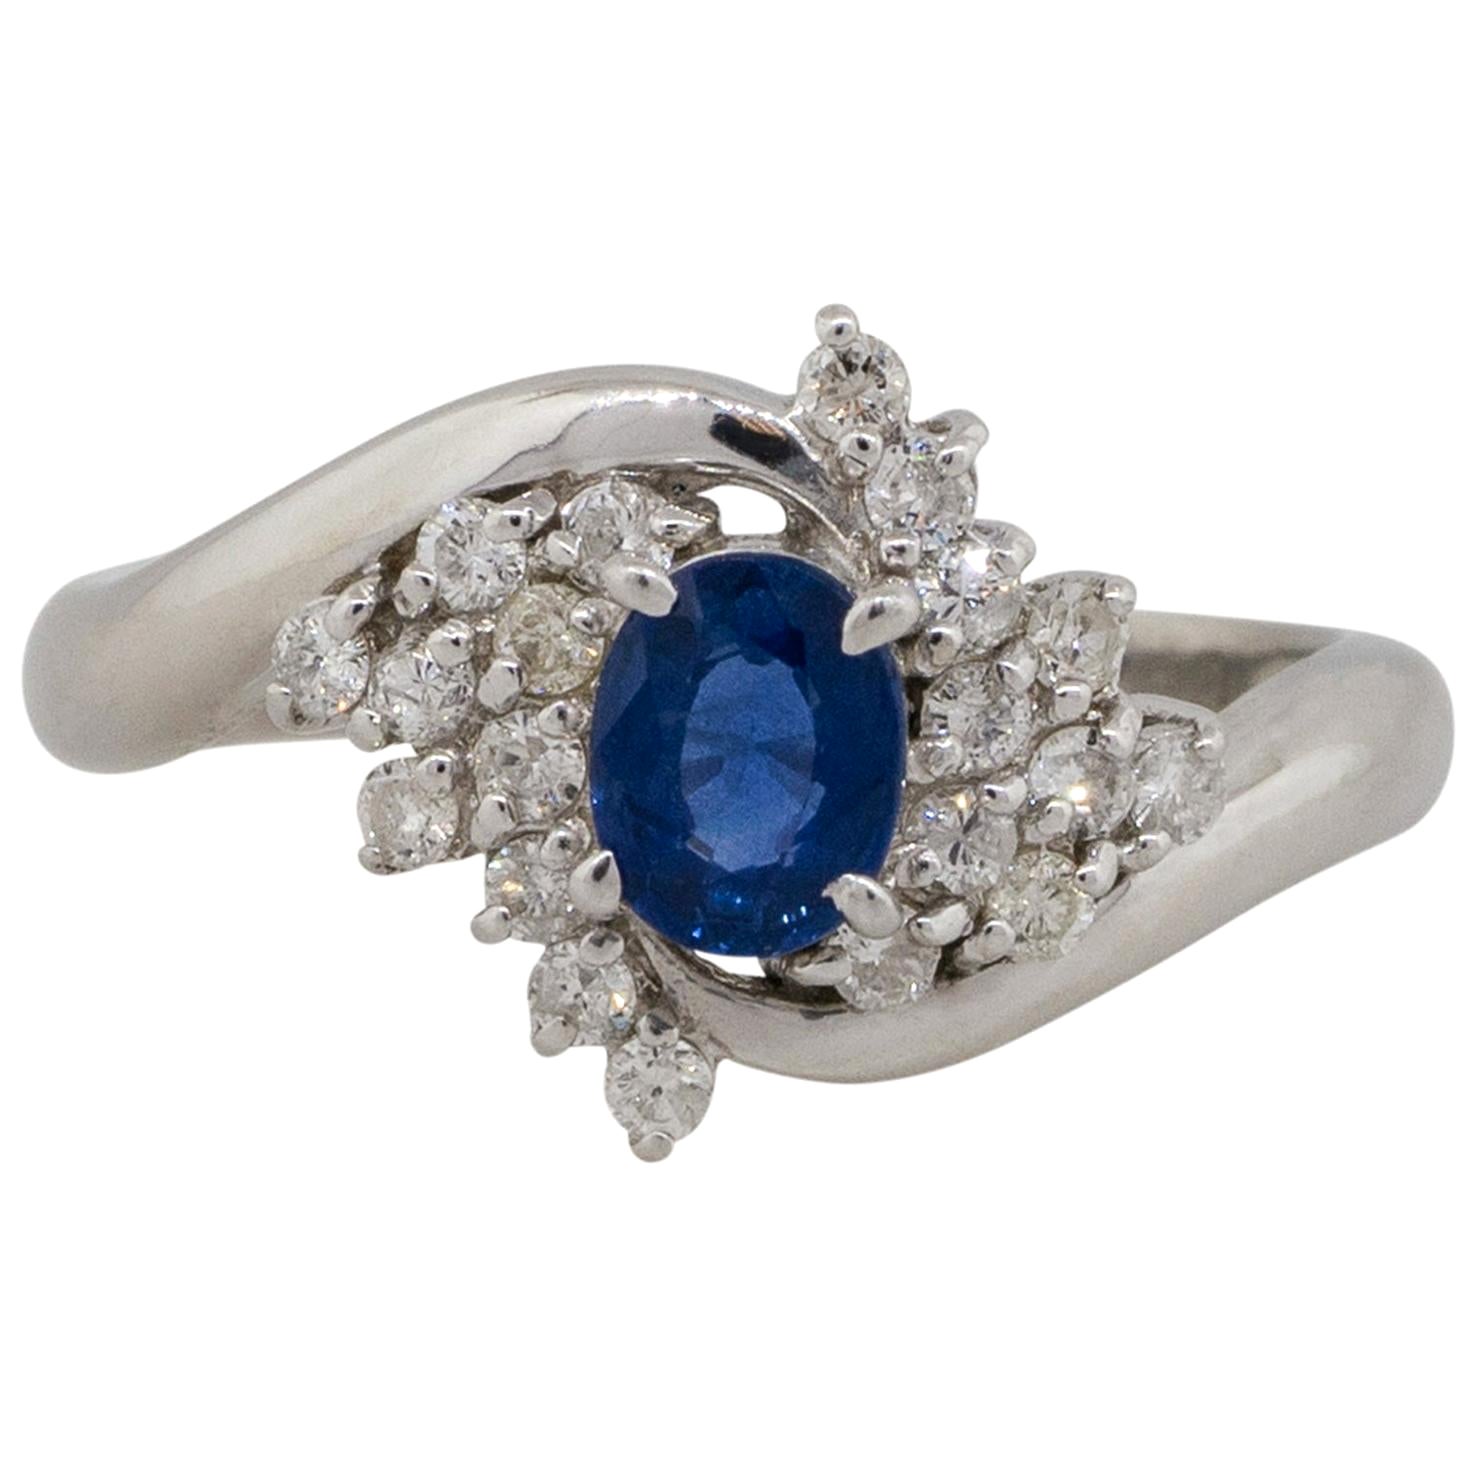 0.48 Carat Oval Cut Sapphire Diamond Cocktail Spiral Ring in Stock For Sale